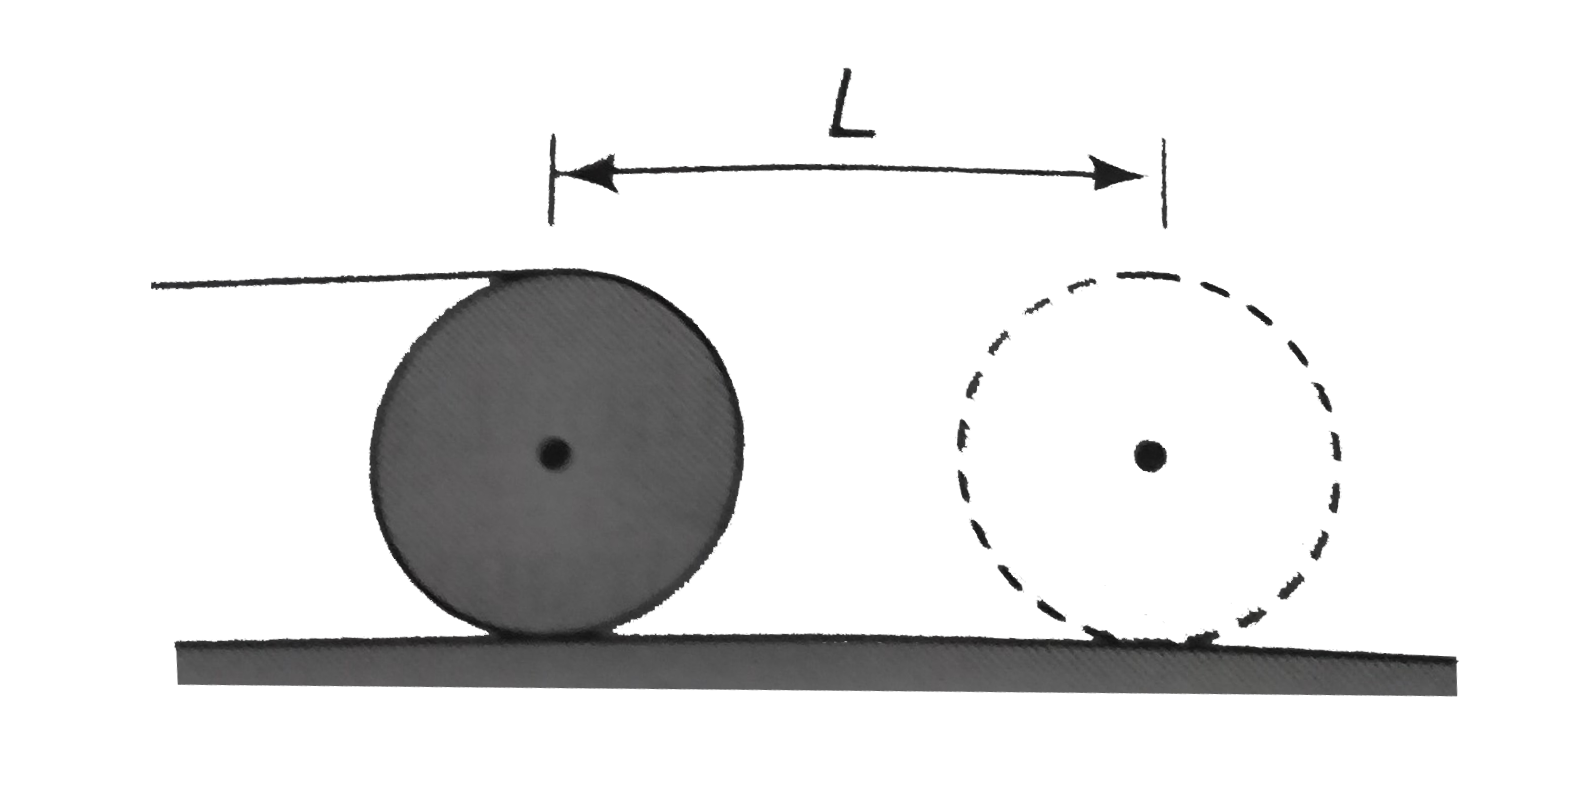 A cylindrical drum, pushed along by a board rolls forward on the ground. There is no slipping at any contact. The distance moved by the man  who is pushing the board, when axis of the cylinder covers a distance L will be.